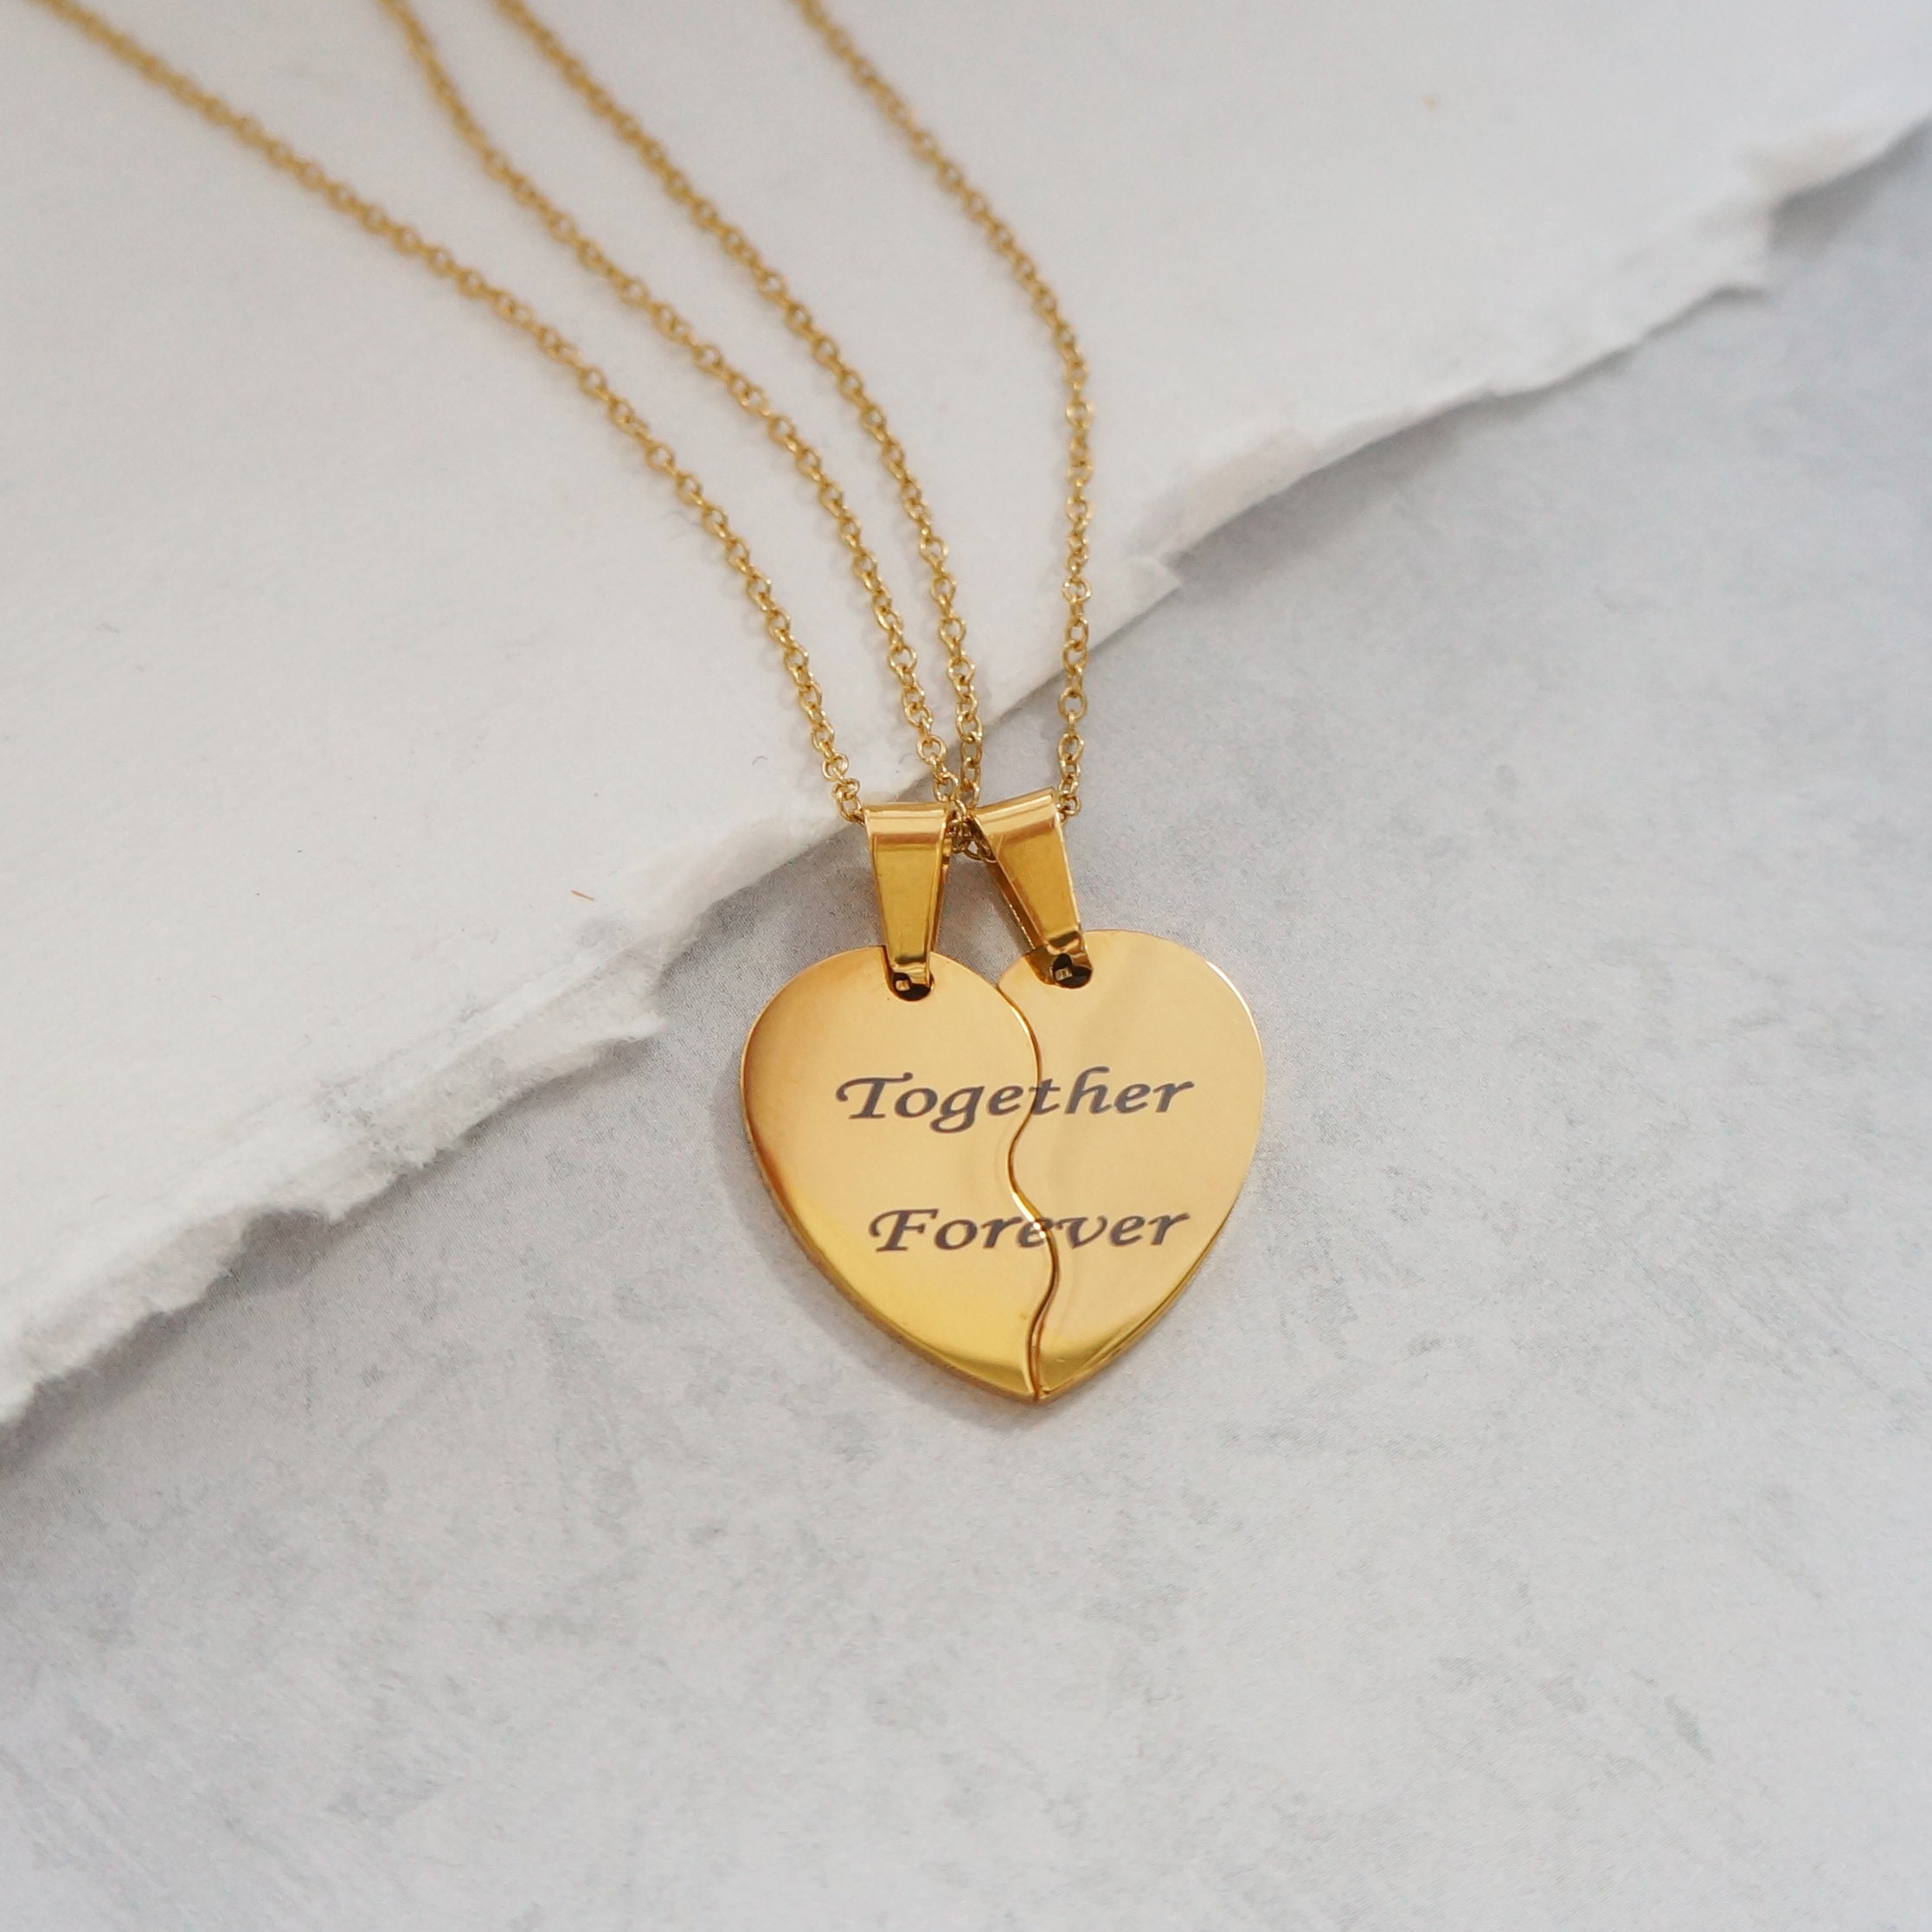 Buy Half Heart TWO Necklaces Split Heart Broken Heart Engraved Heart  Necklaces Best Friends Mother Daughter Sisters SET Gift Couples Online in  India - Etsy